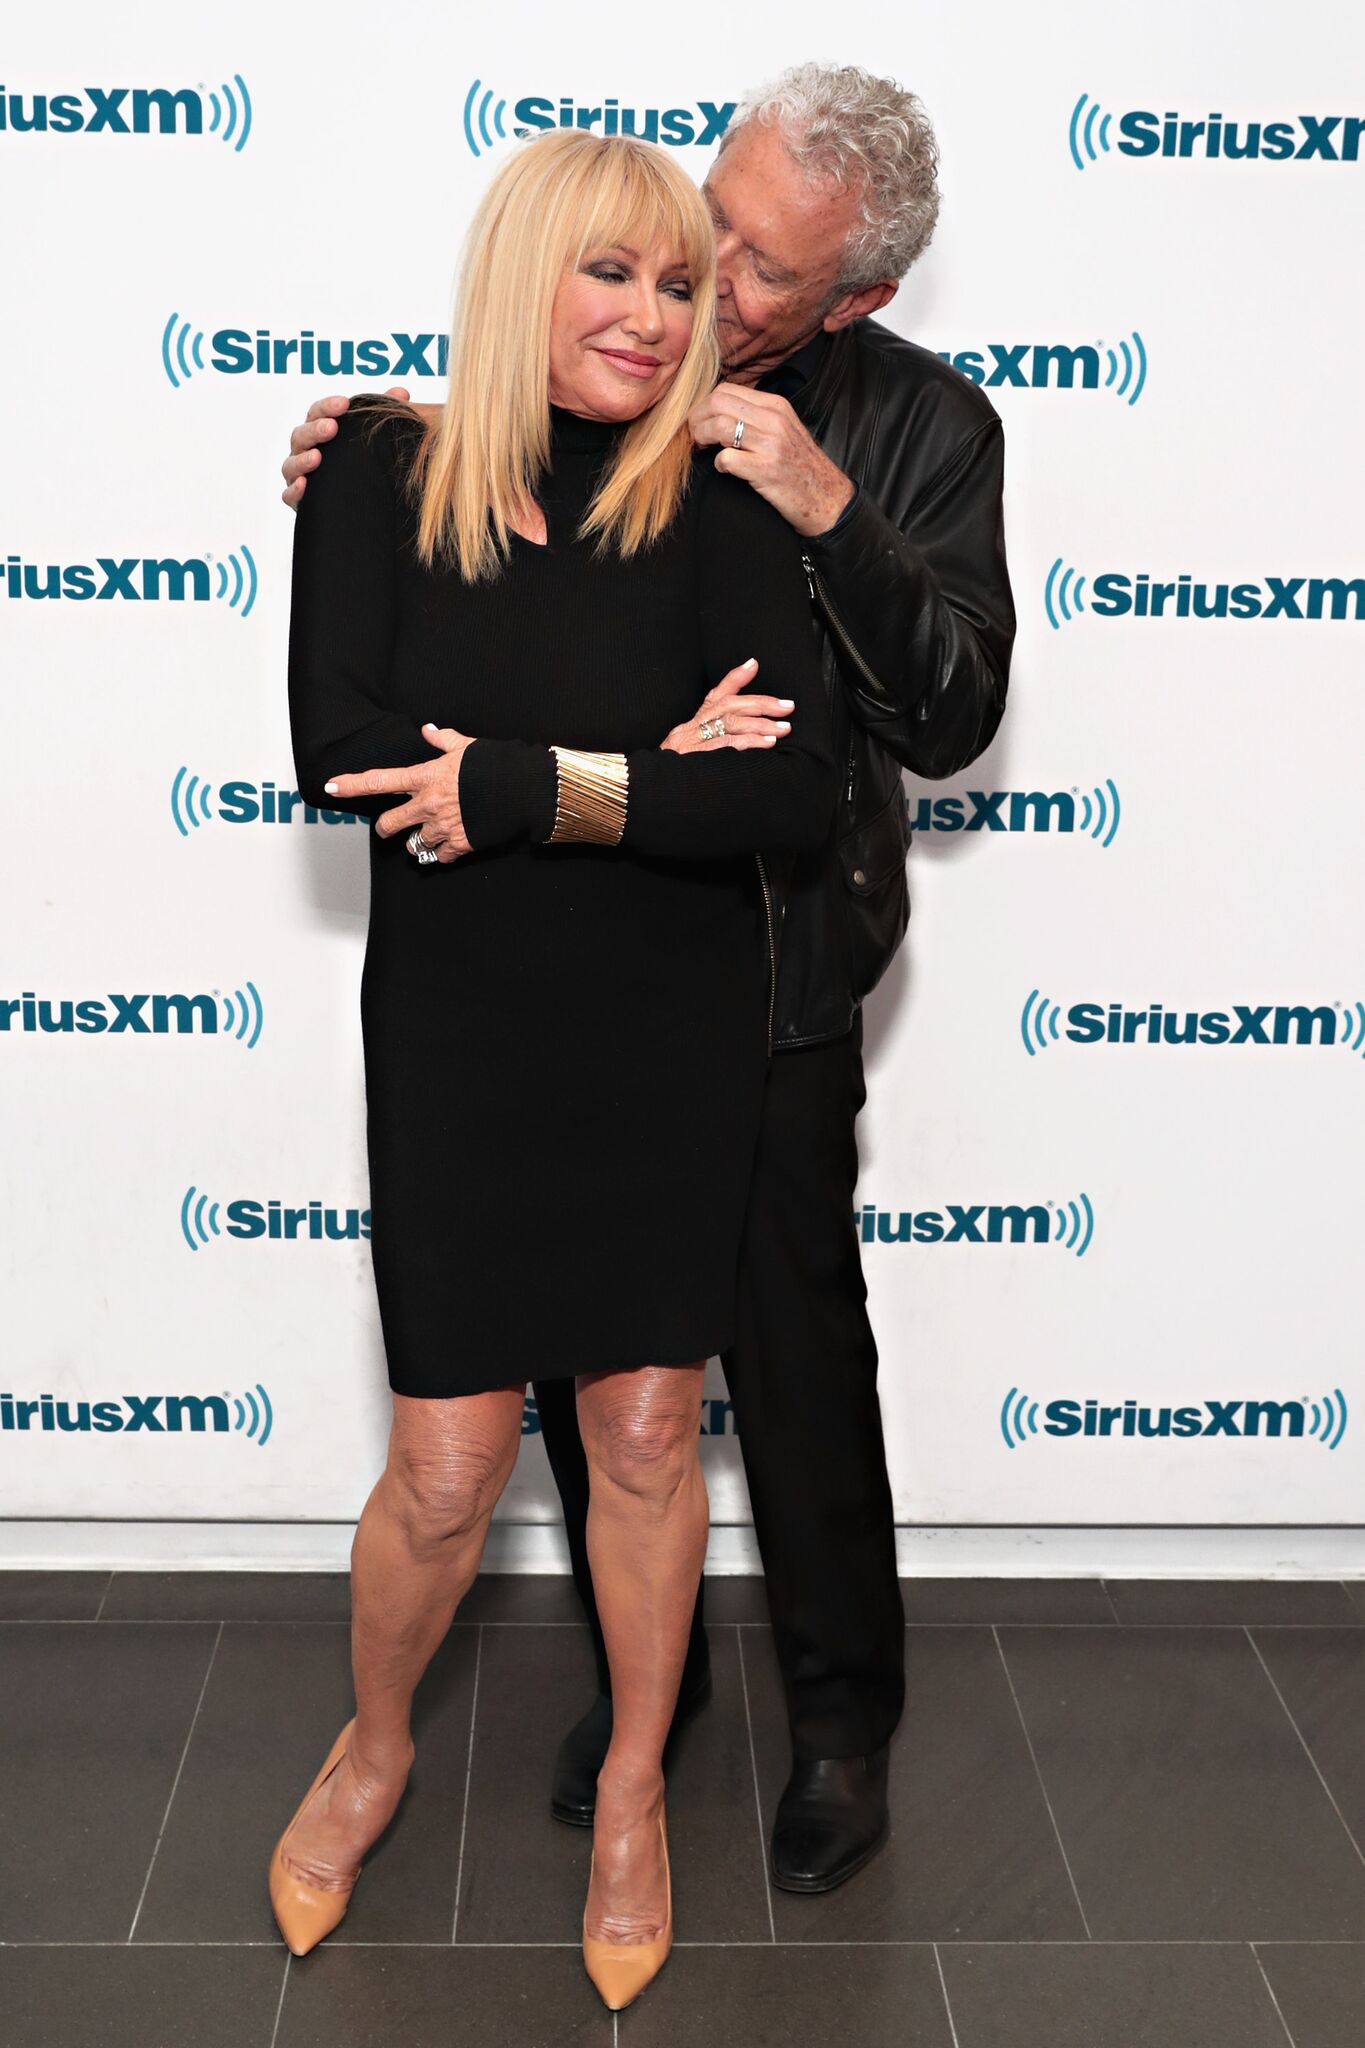 Suzanne Somers and husband Alan Hamel visit the SiriusXM Studios | Getty Images